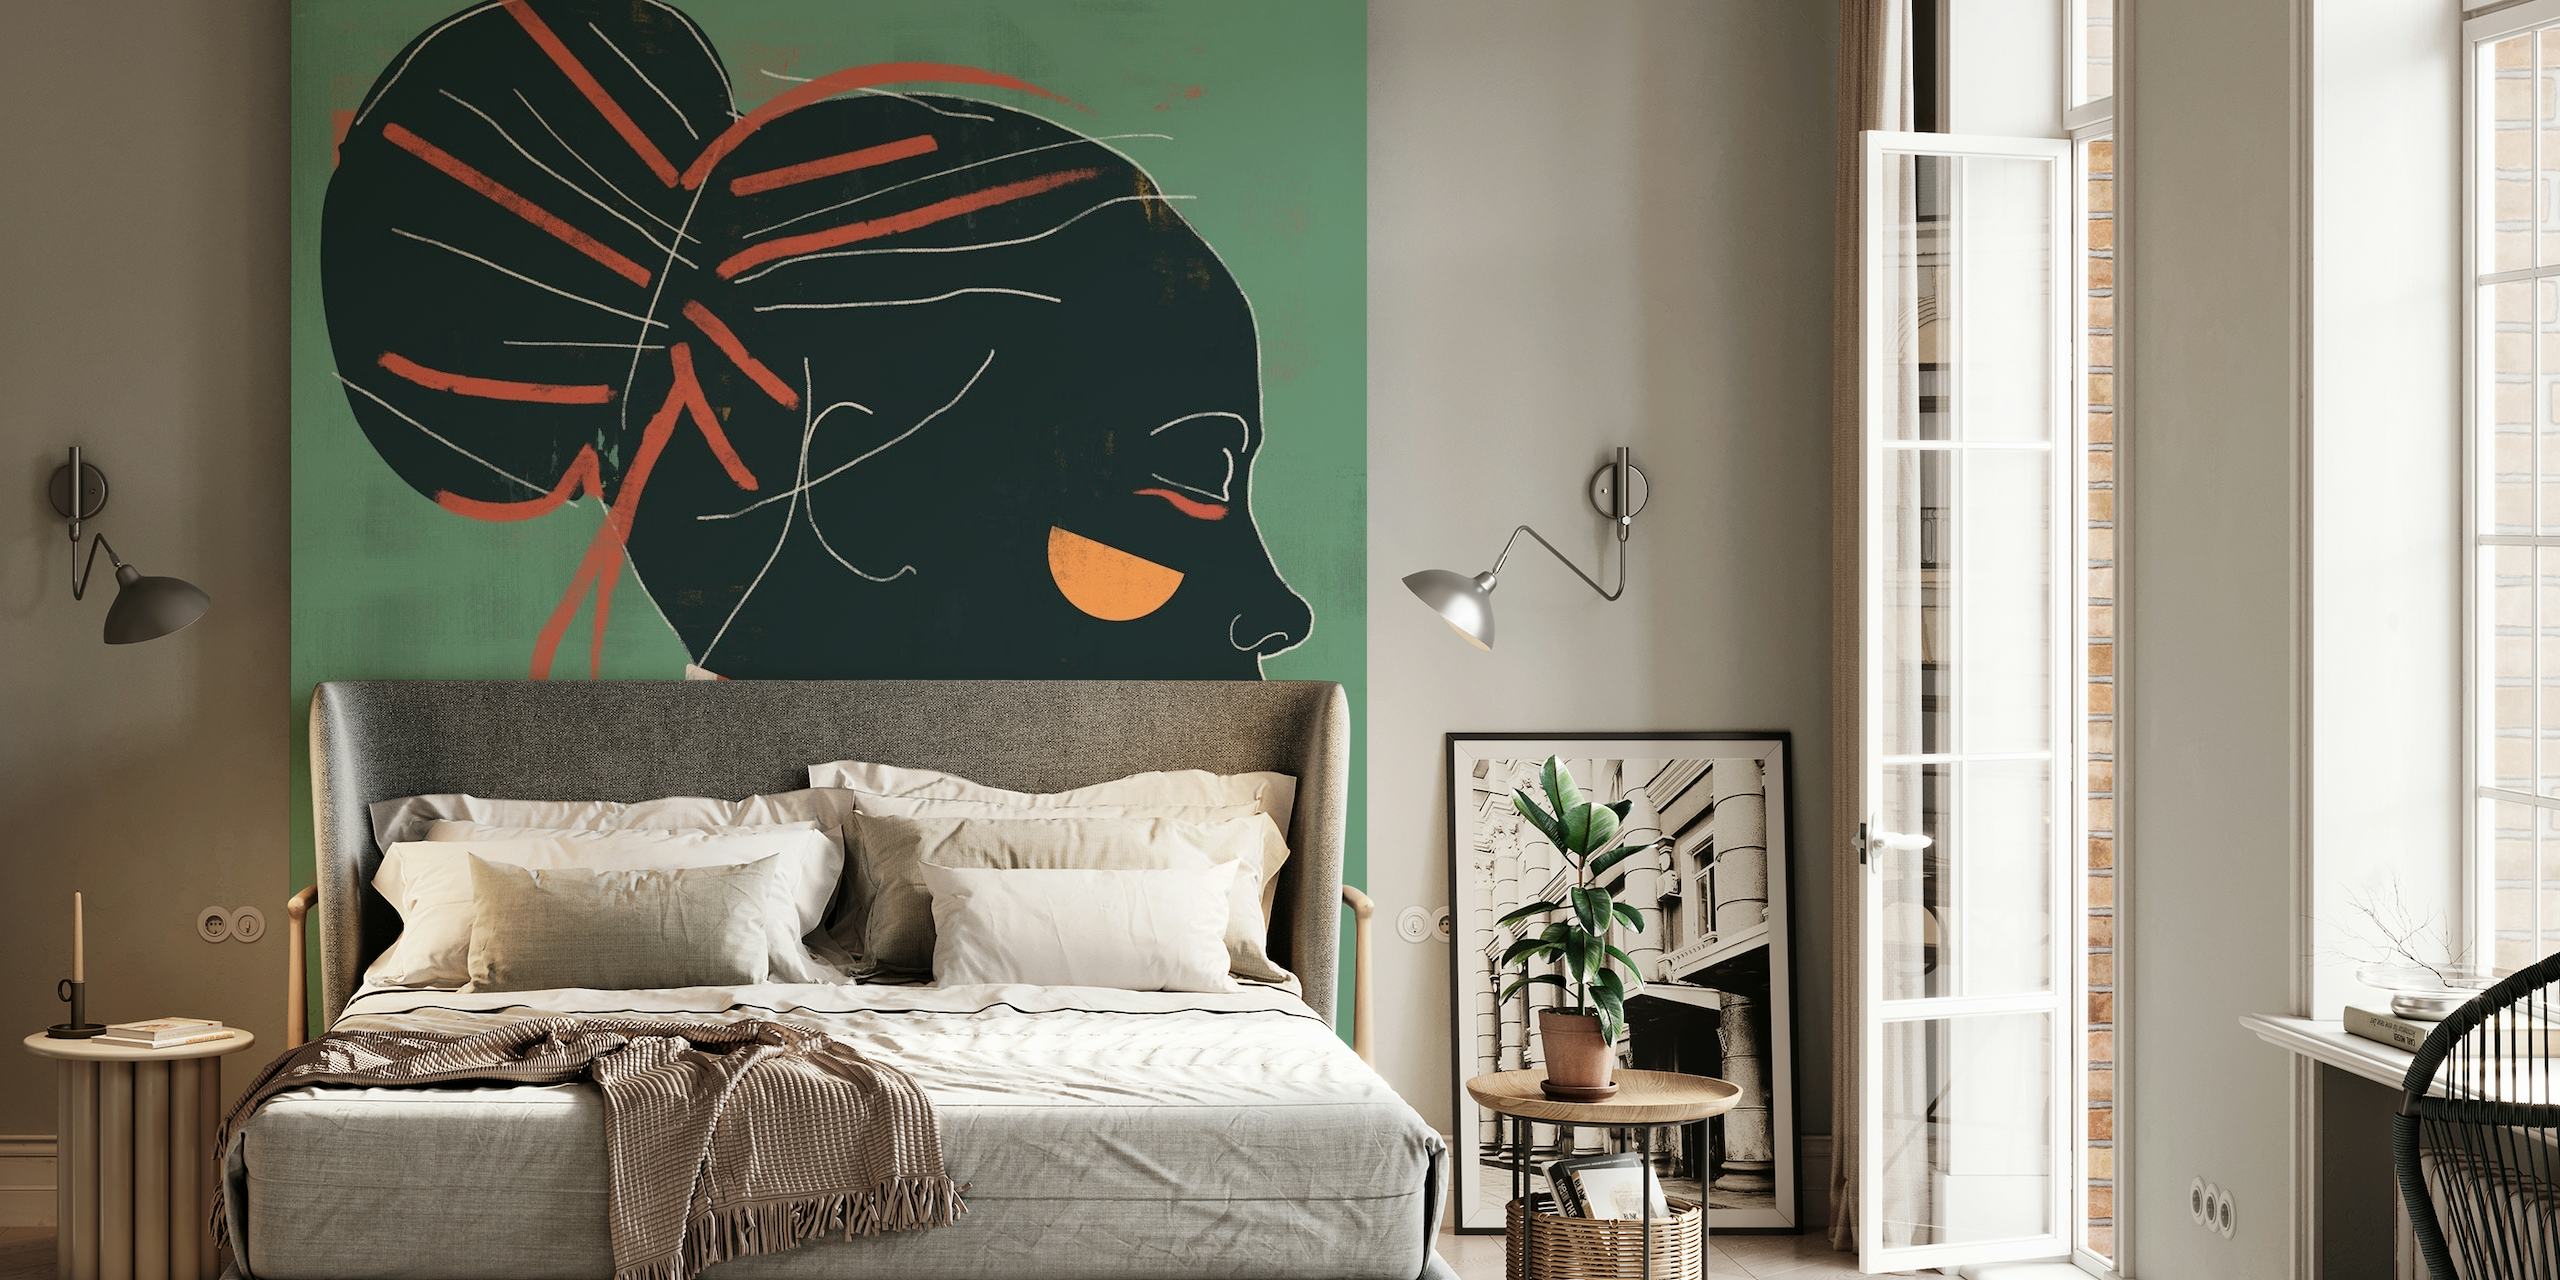 Abstract female profile wall mural in green with geometric accents